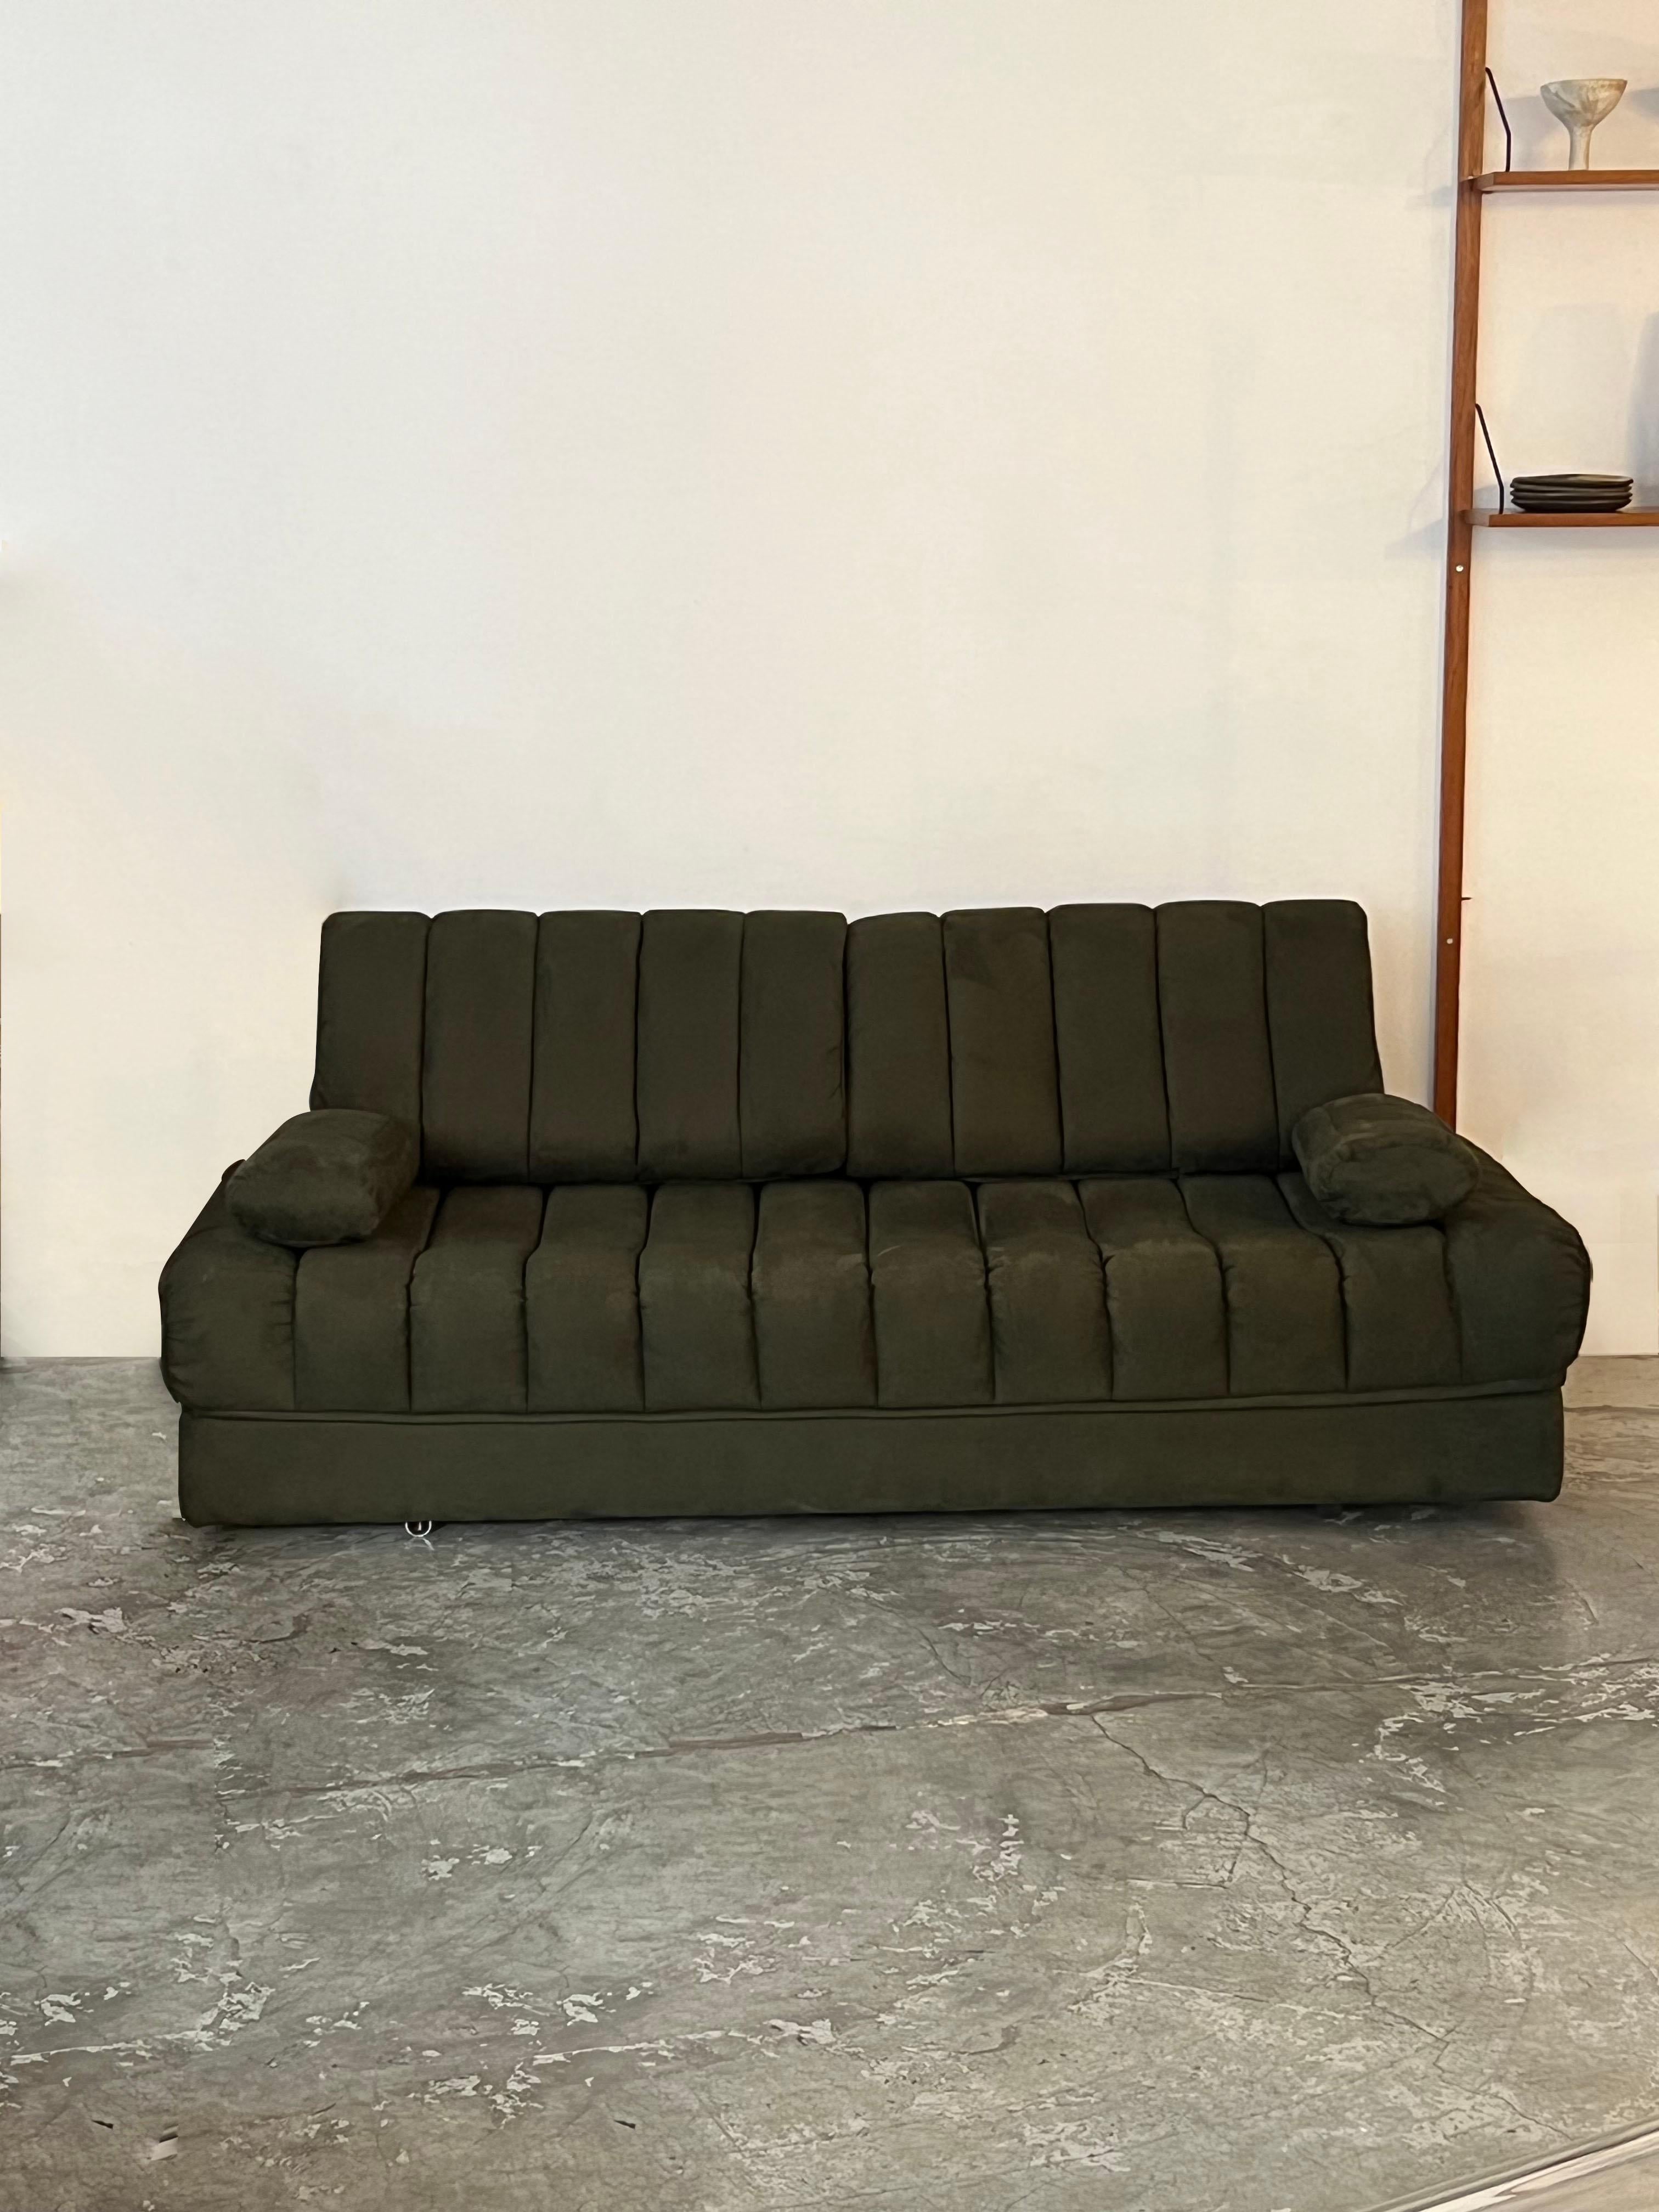 This sofa bed was produced by the famous Swiss publishing house De Sede in the 60s. De Sede is a Swiss brand of high-quality furniture, founded in 1965 by brothers Helmut, Urs and Egidio De Sede. Since its inception, the brand has focused on the